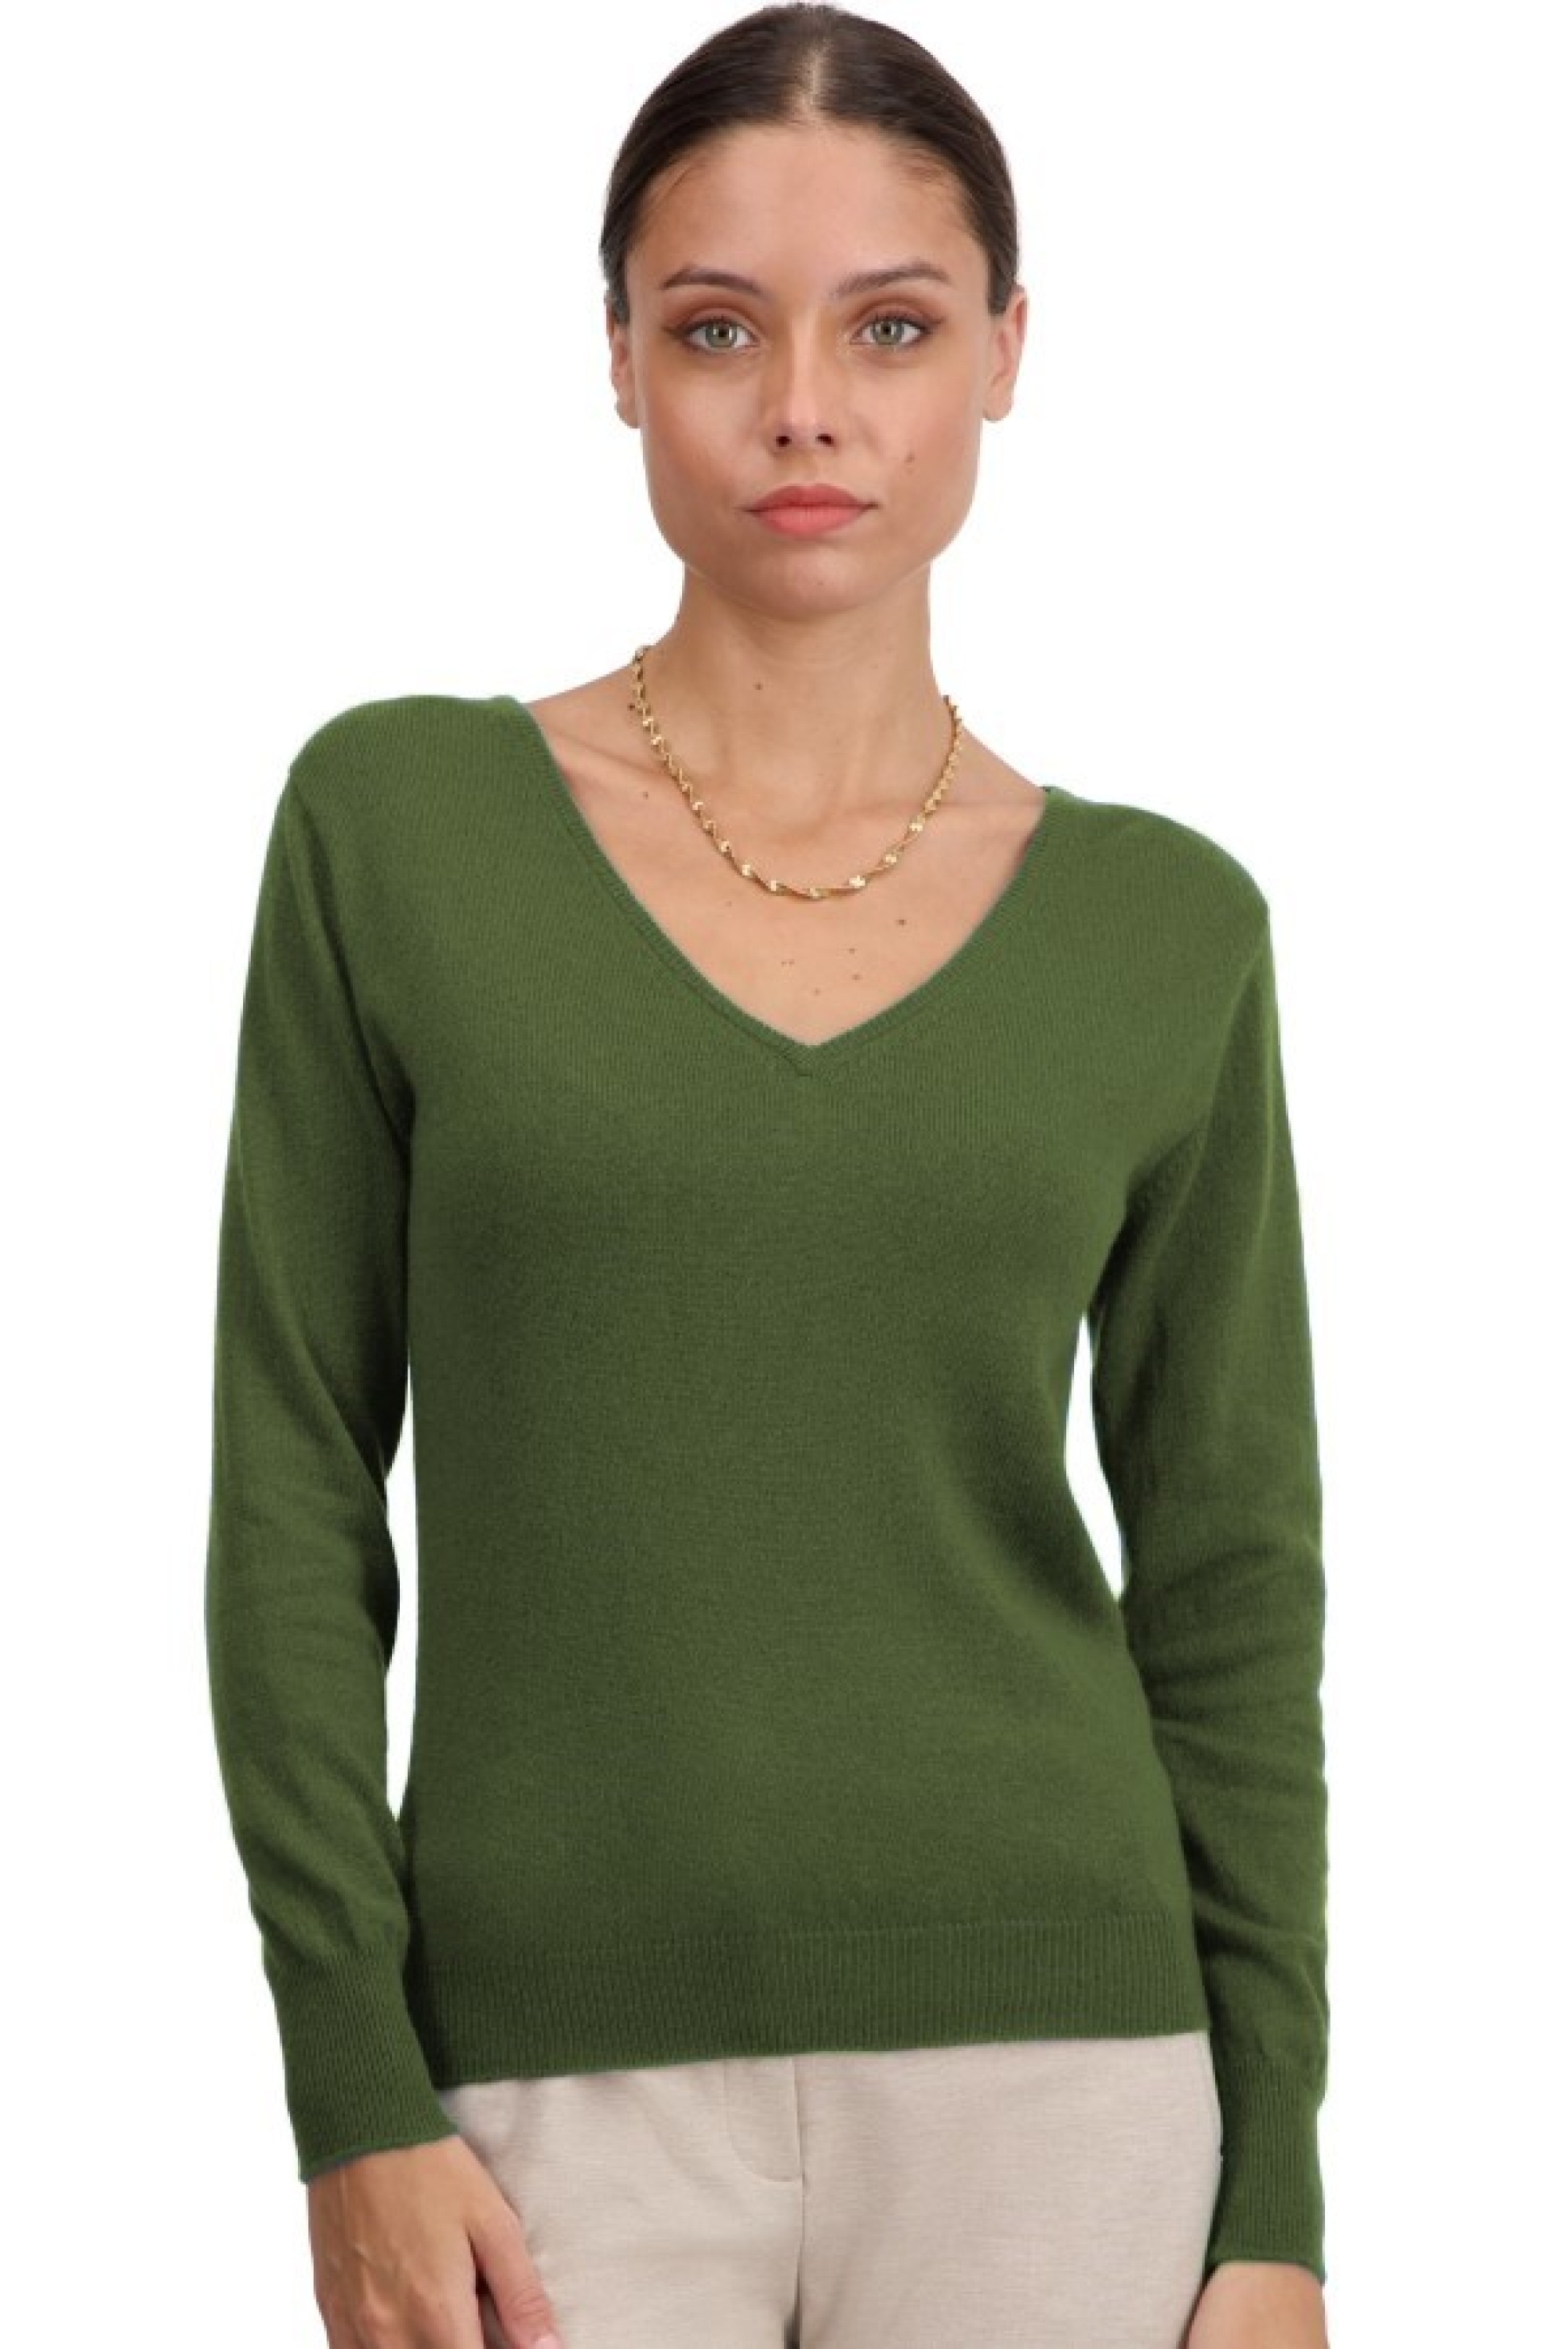 Cashmere ladies basic sweaters at low prices trieste first olive l